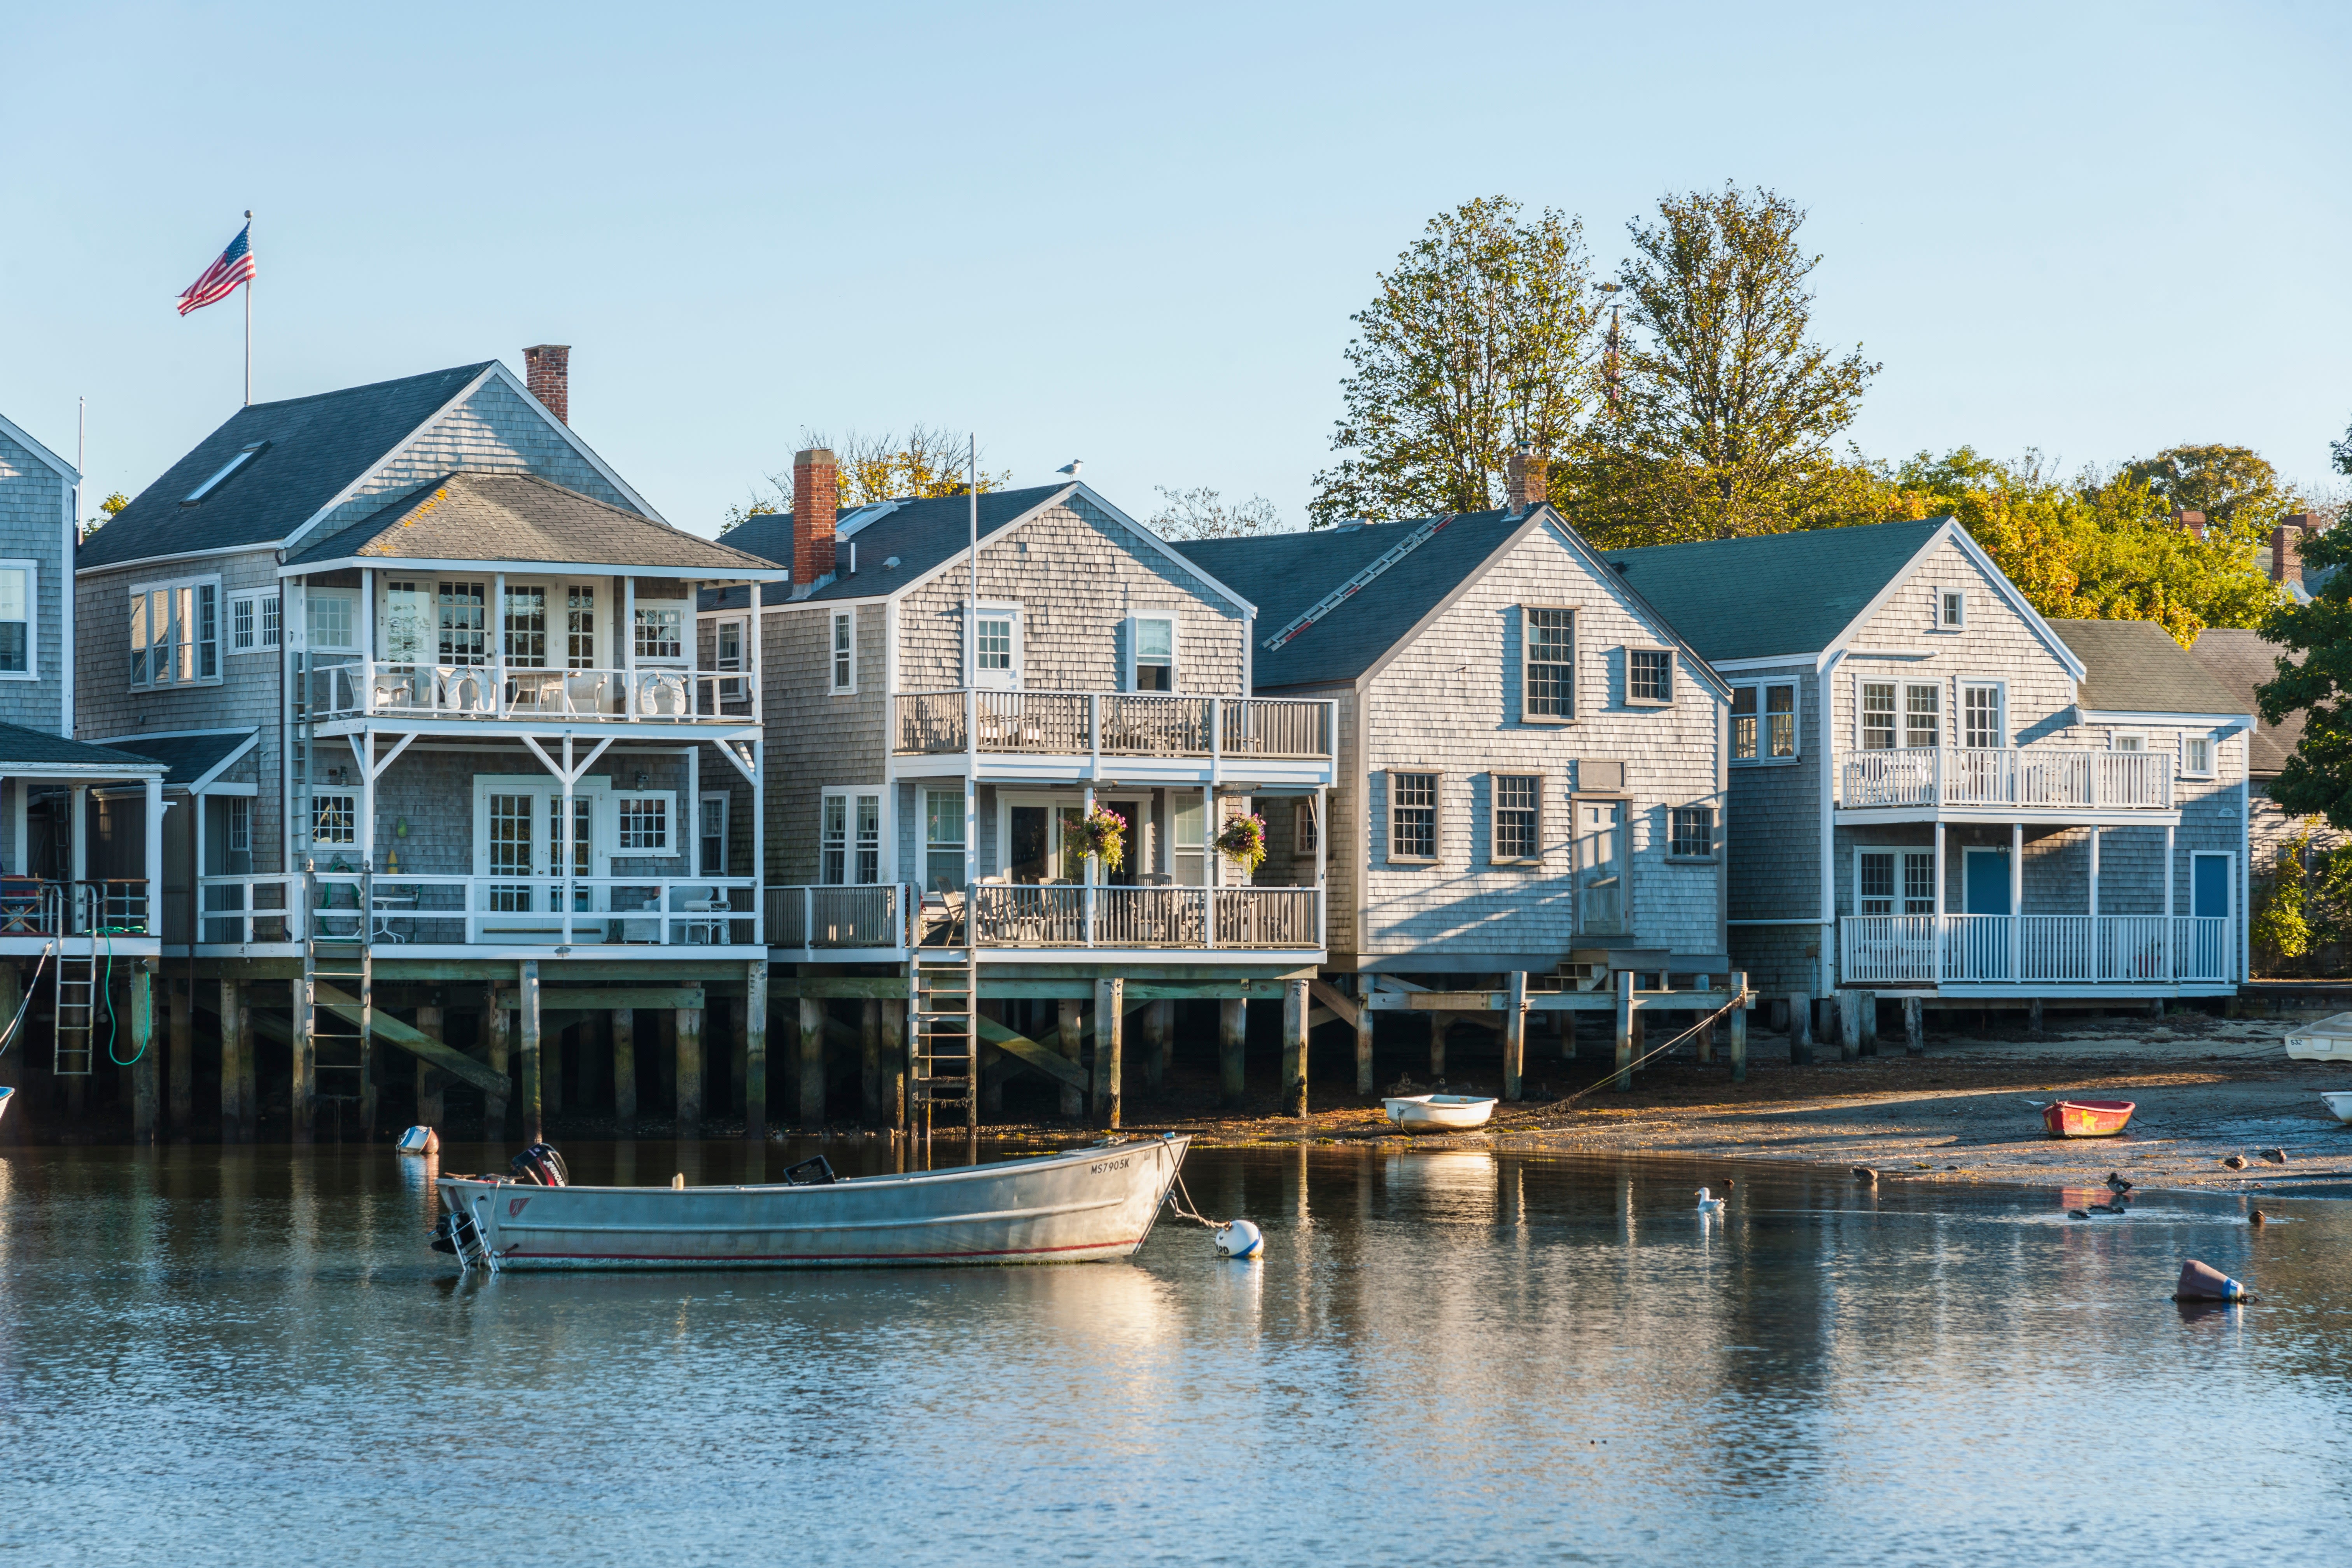 The Best Things to Do in Nantucket, From Sublime Beaches to Beloved Hotel Bars